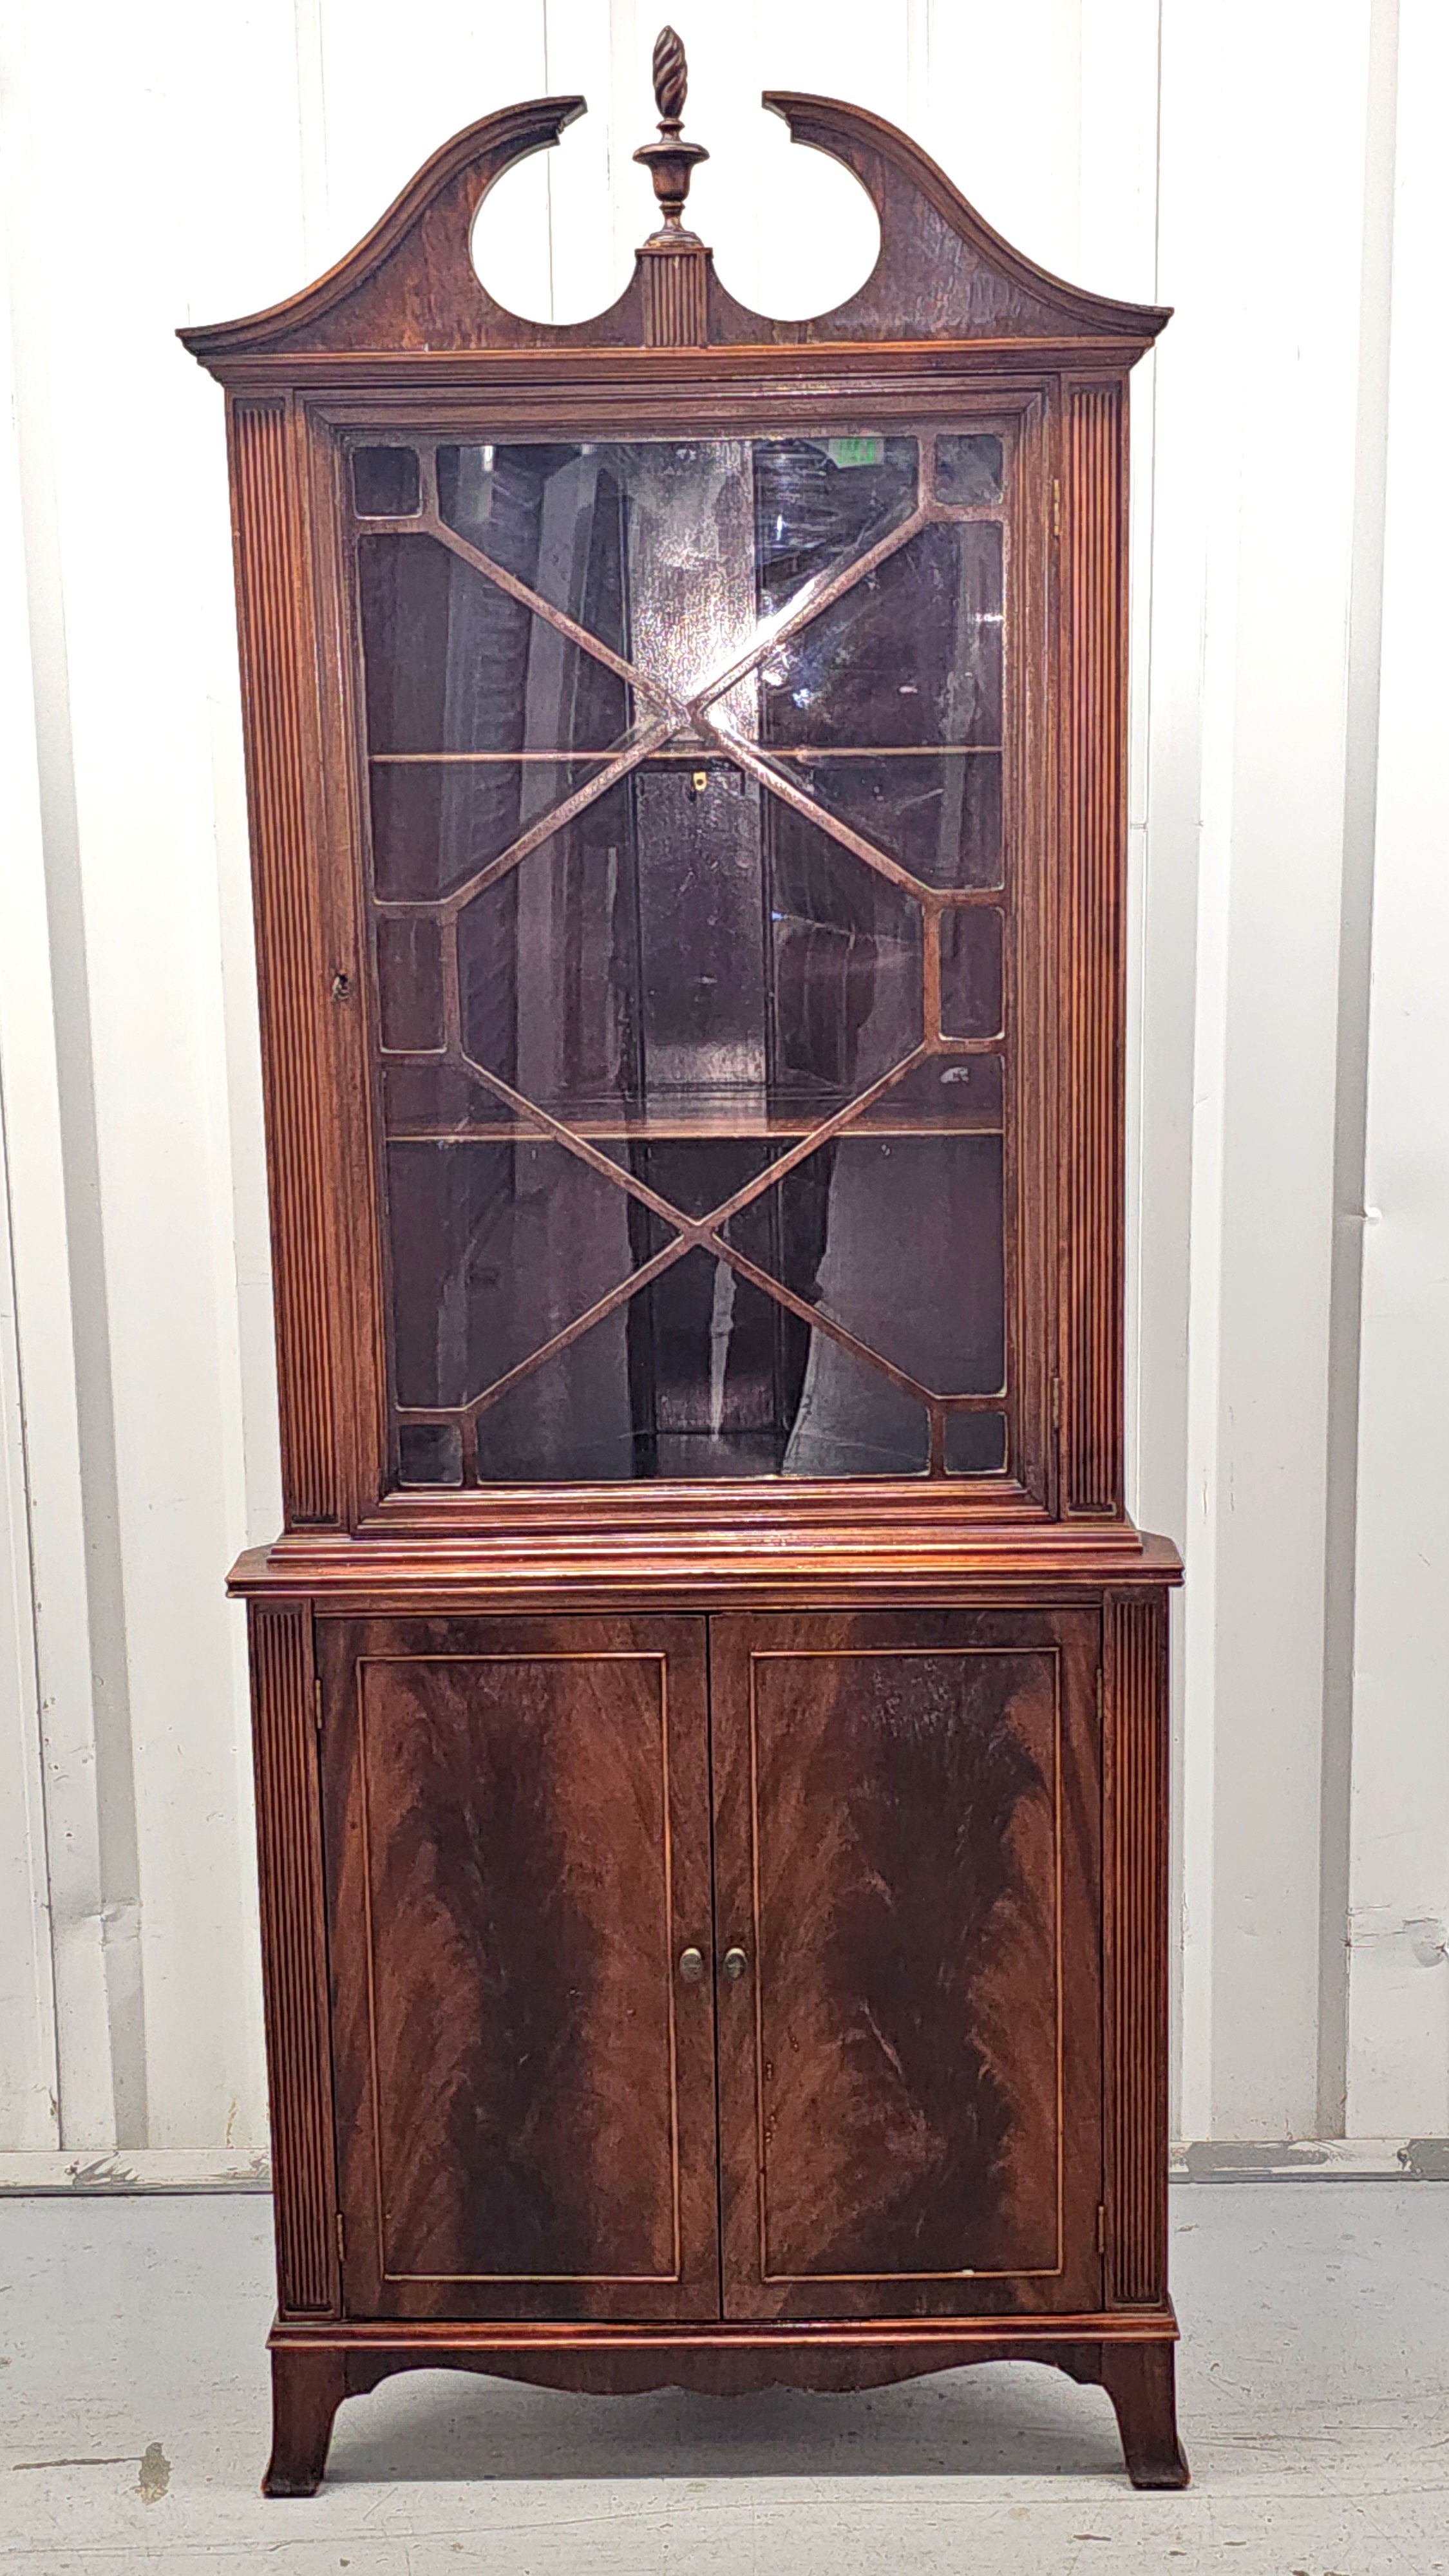 A 19th Century Swirl  Mahogany Georgian Style corner cabinet. Glass front with locking door with key. Removable wood shelves. Measures 29